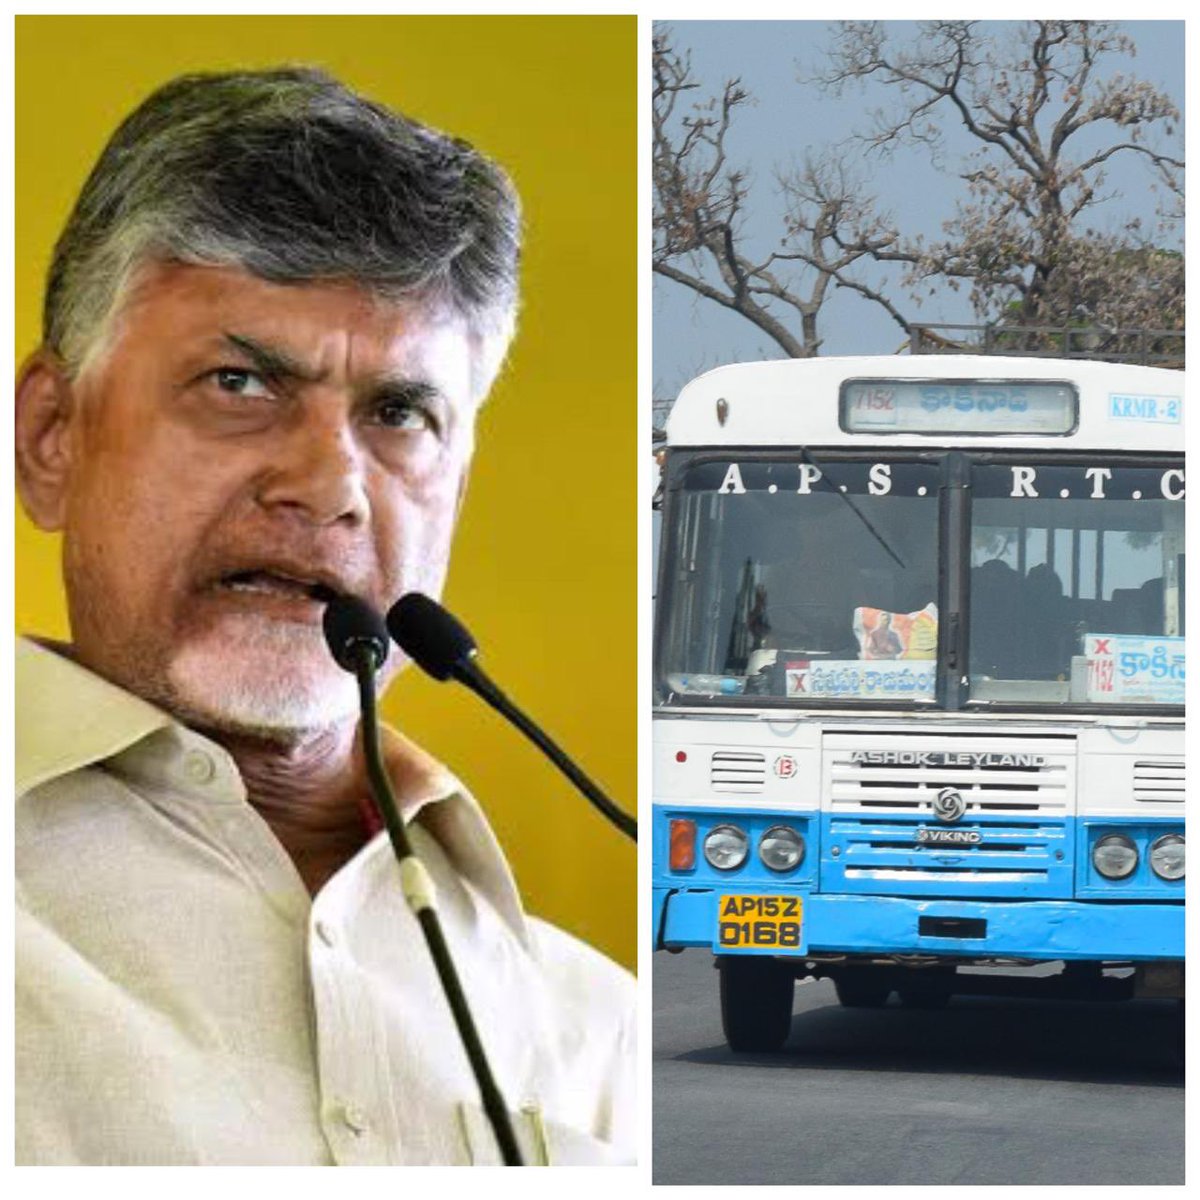 Naidu Promises Women Free Bus Travel Revanth led Congress is implementing it in Telangana Telugu Desam Party (TDP) president N. Chandrababu Naidu has pledged free bus travel for women in Andhra Pradesh if the TDP-JSP-BJP alliance wins the upcoming elections. Speaking at Gudur